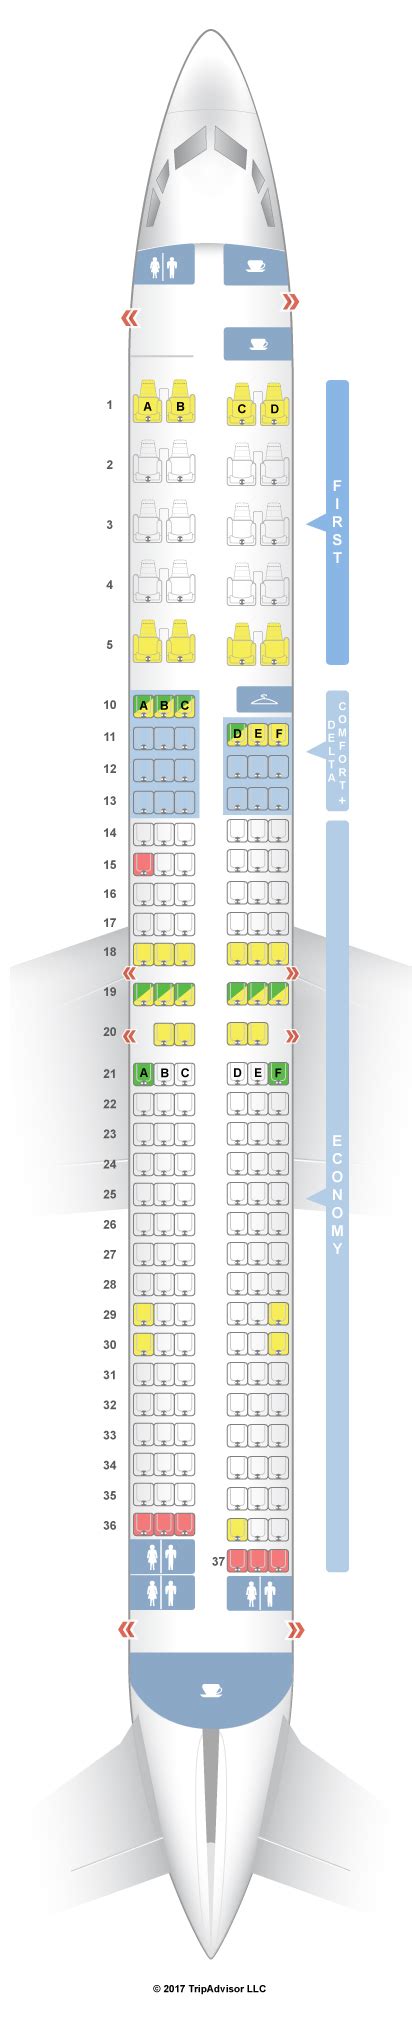 Submitted by SeatGuru User on 2020/01/17 for Seat 6A After being familiar with the similar 1+2+1 layout of the 777-300 four-class version, I was disappointed to find that the seat on the 787-9 is similar but smaller; the difference really made me feel claustrophobic.. 